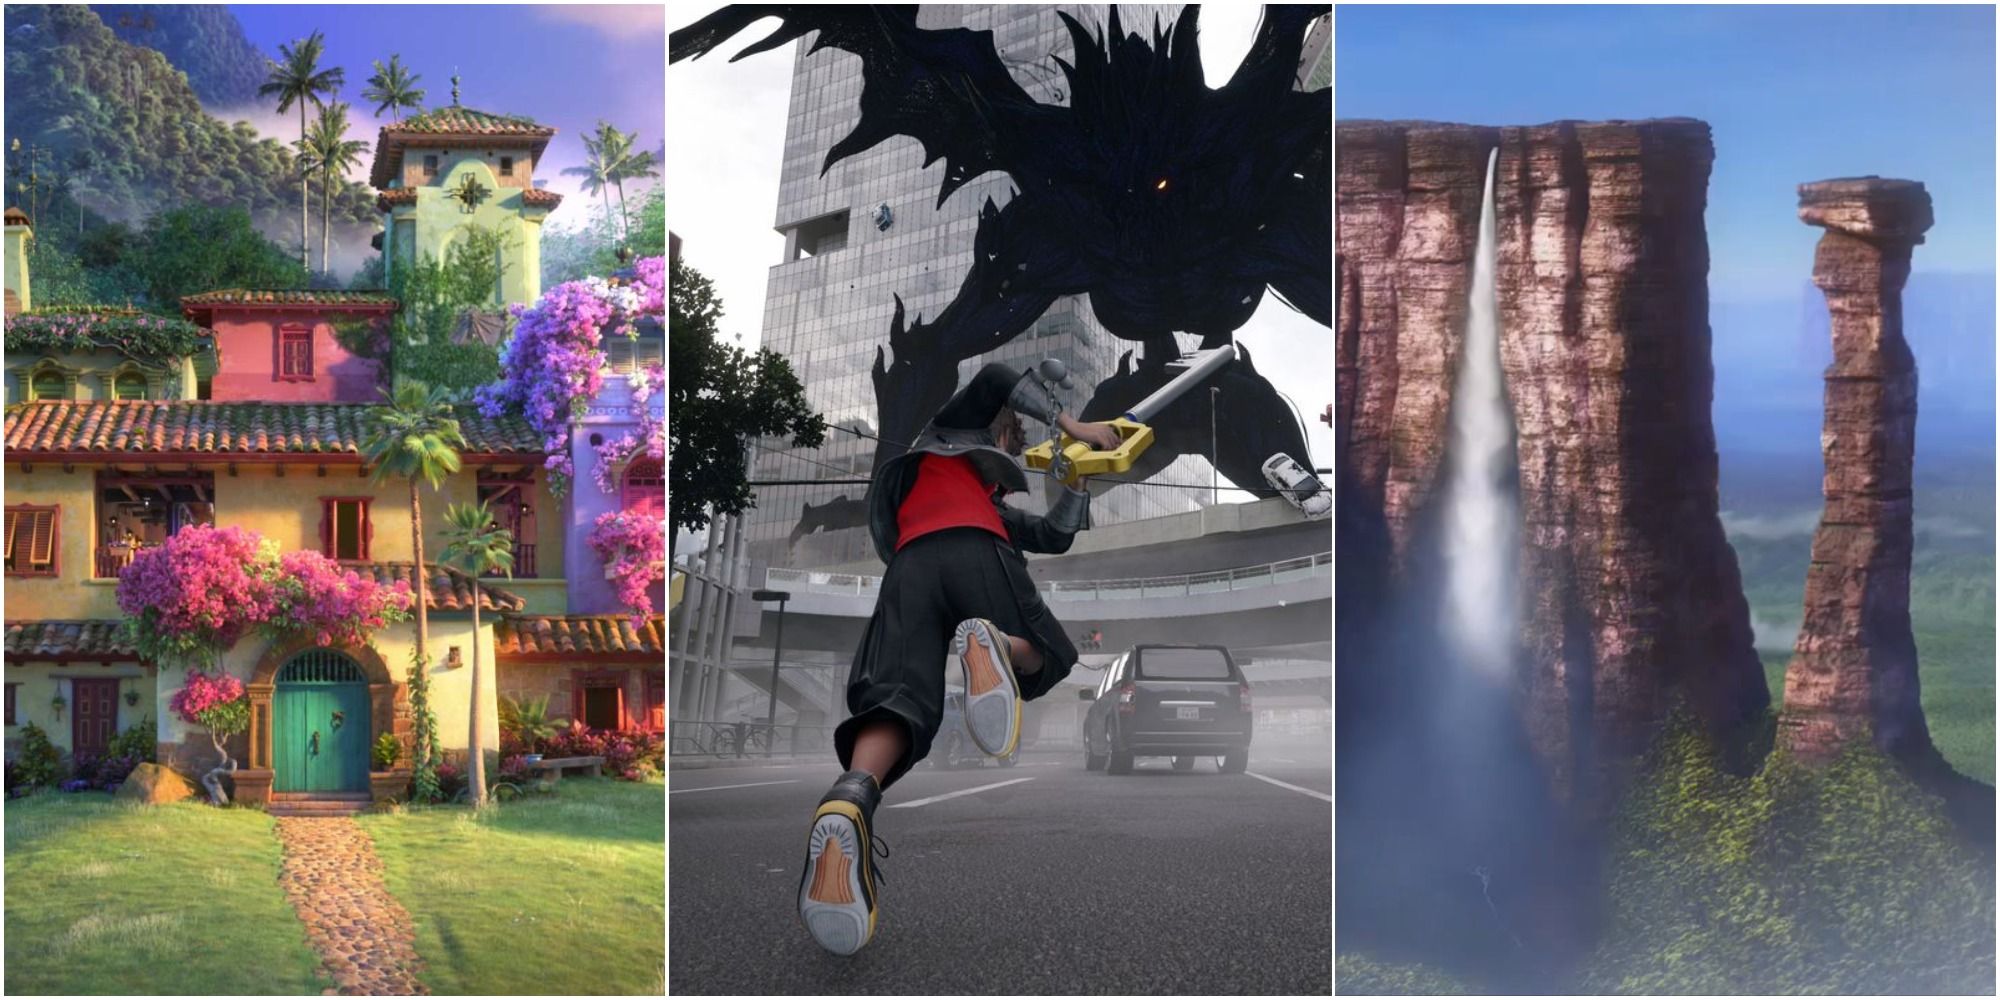 A collage showing Sora from the Kingdom Heart 4 reveal along with Casa Madrigal and Paradise Falls